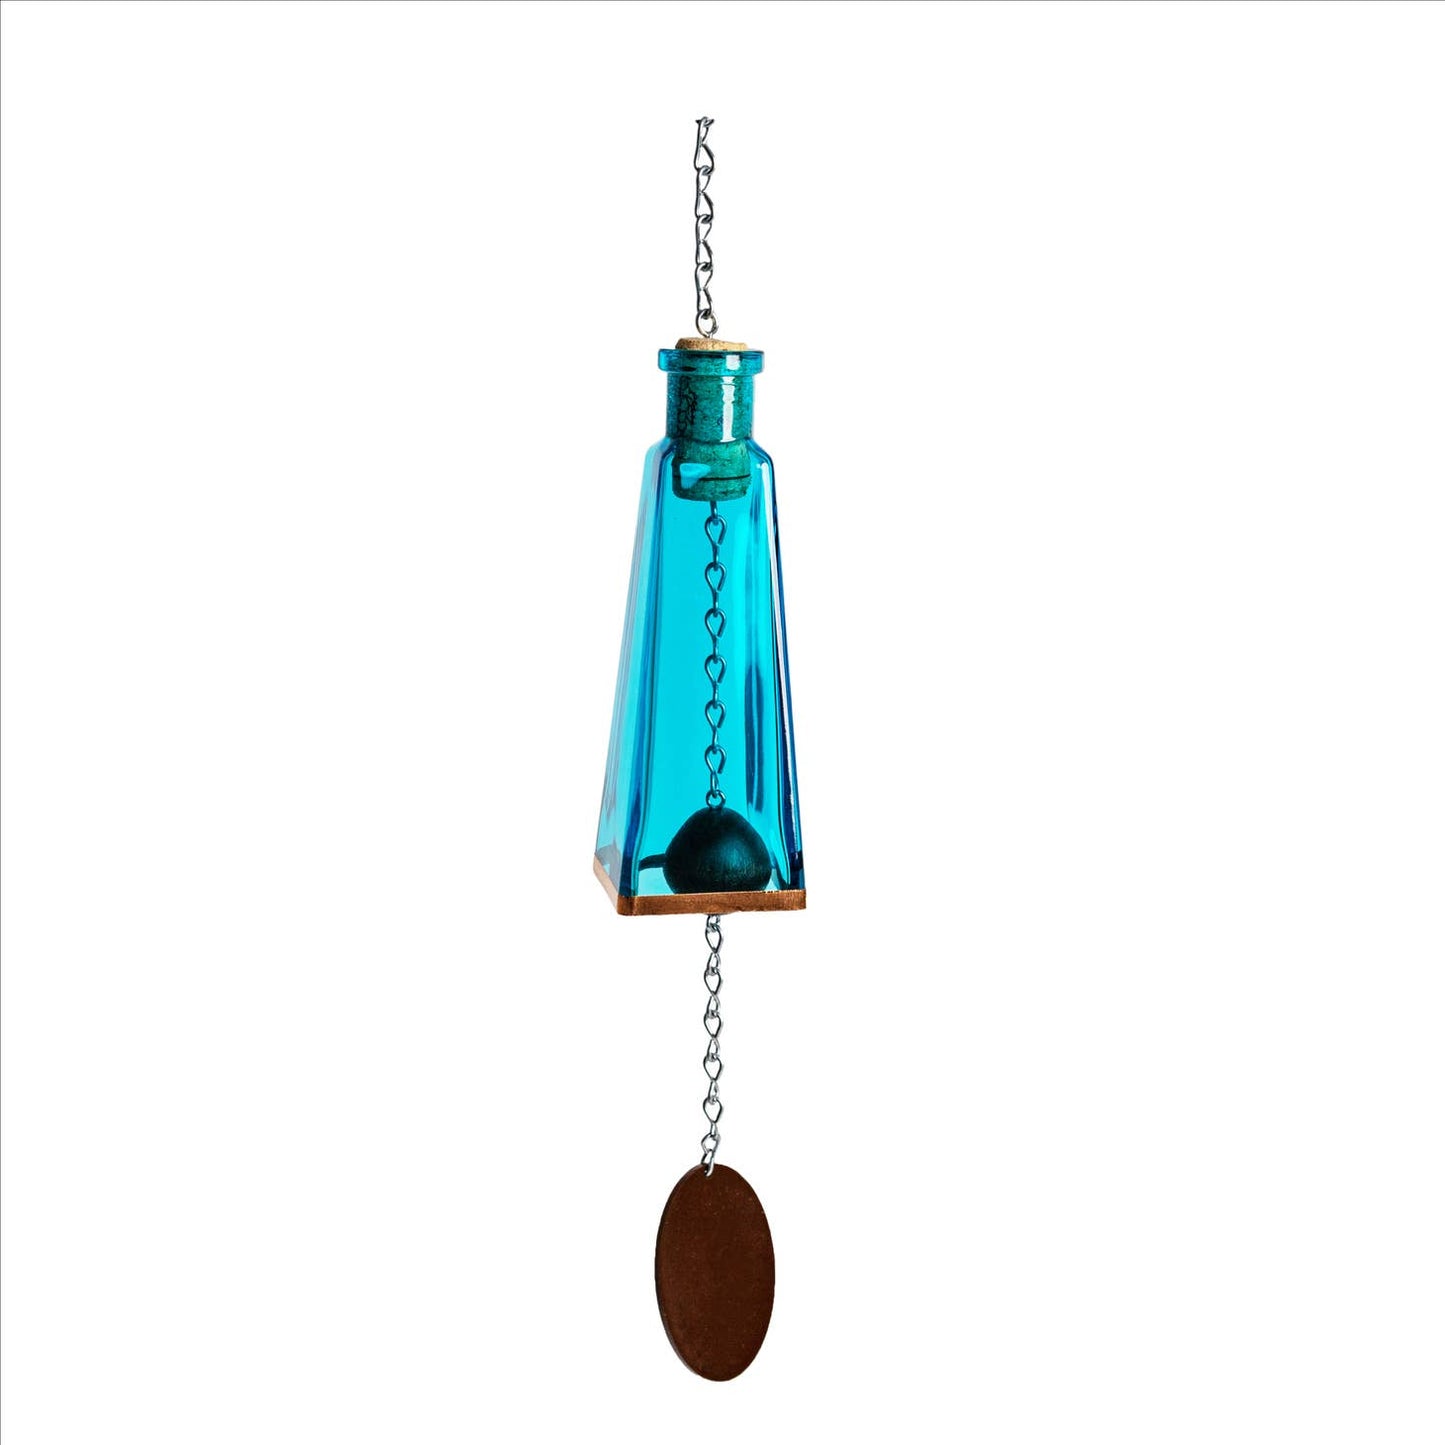 Glass Wind Chimes Made From Pyramid Shaped Bottles